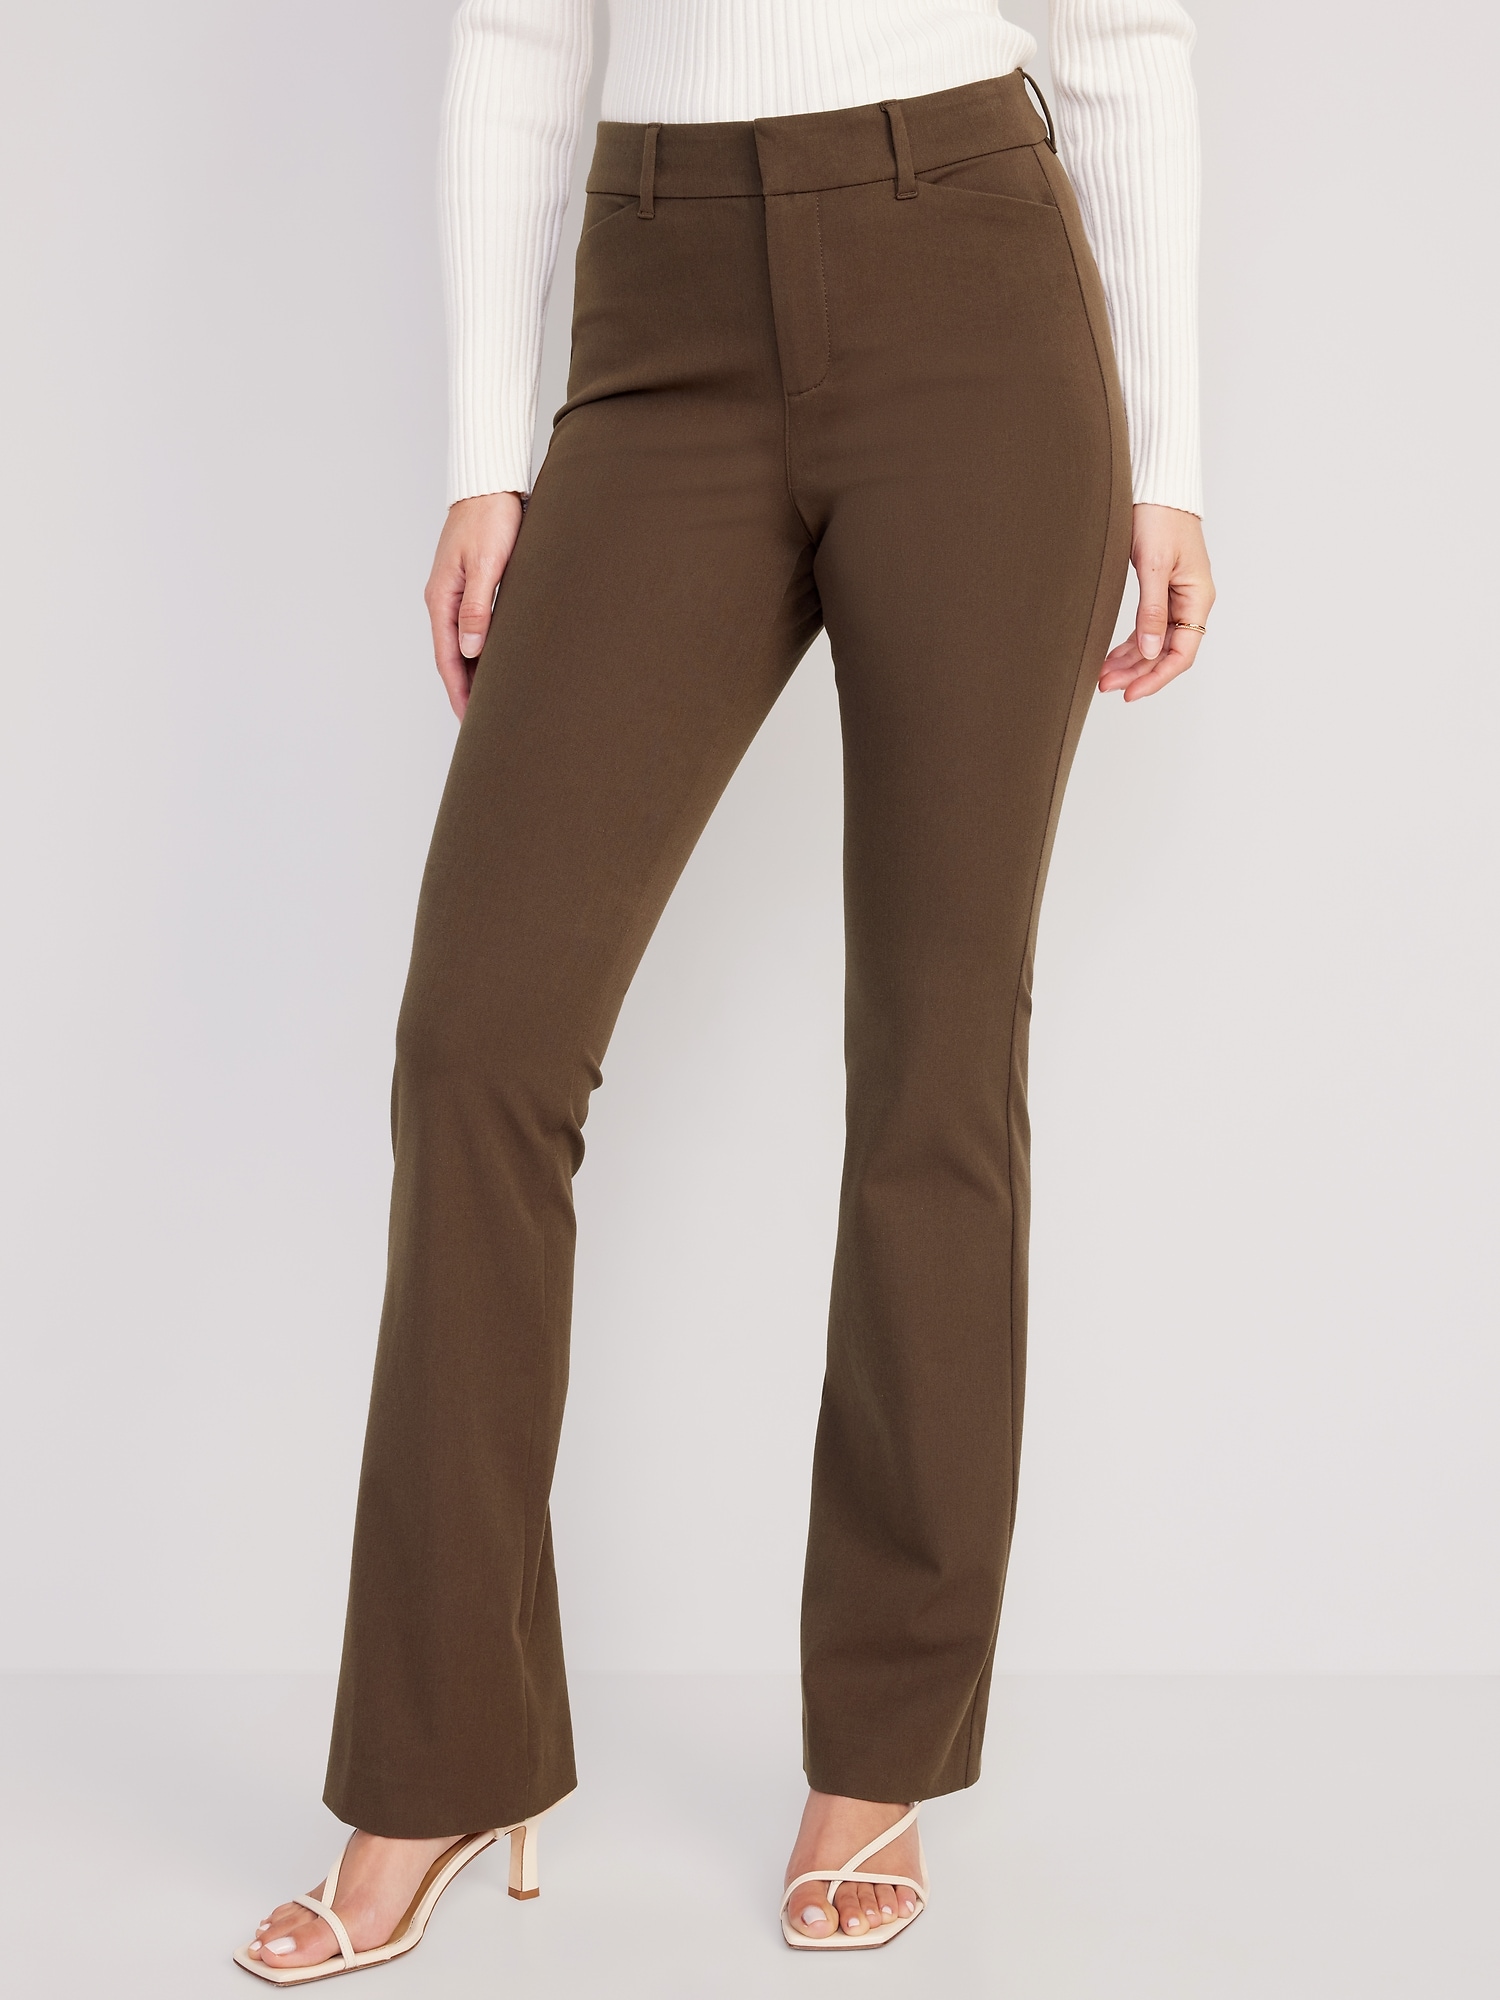 Buy Mlada High Waist Wide Leg Flared Pants Elastic Waist Band for Women  Office Work Formal Wear Stretch Cotton Knit Flare Pants Utility Pockets  Extra Flare Pants Trousers for Travel-Beige, XS at